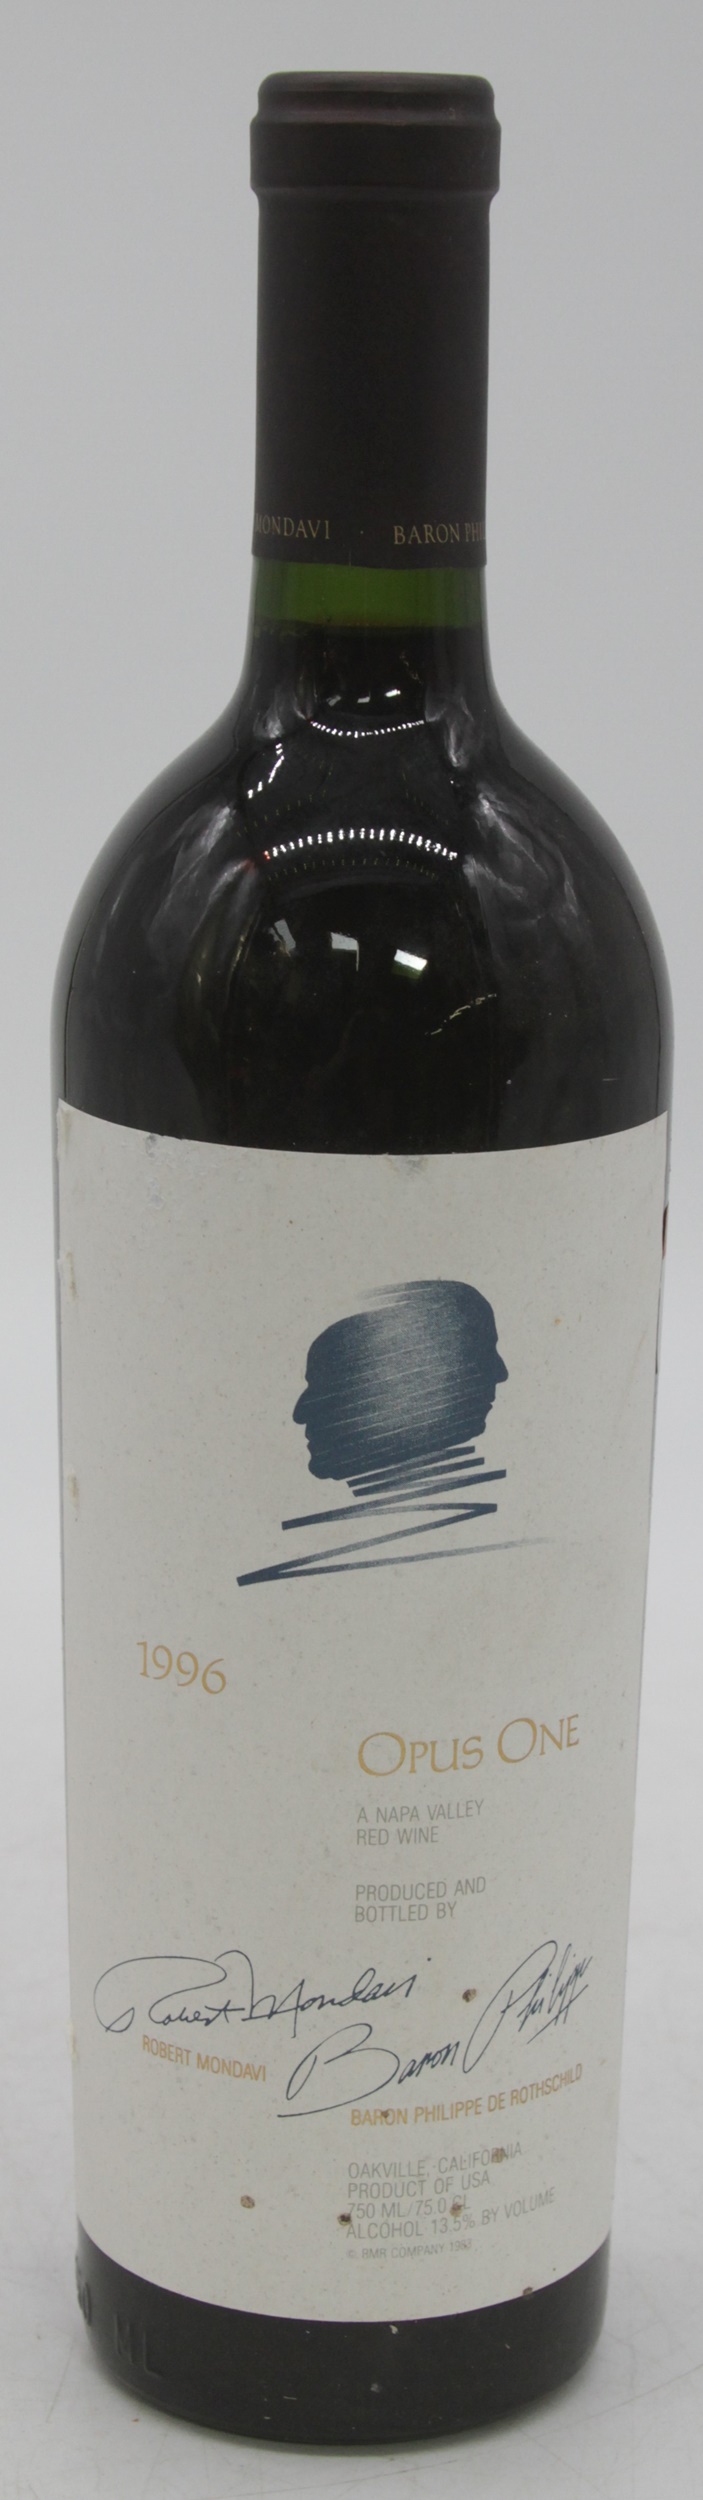 Lot 1048 - Opus One